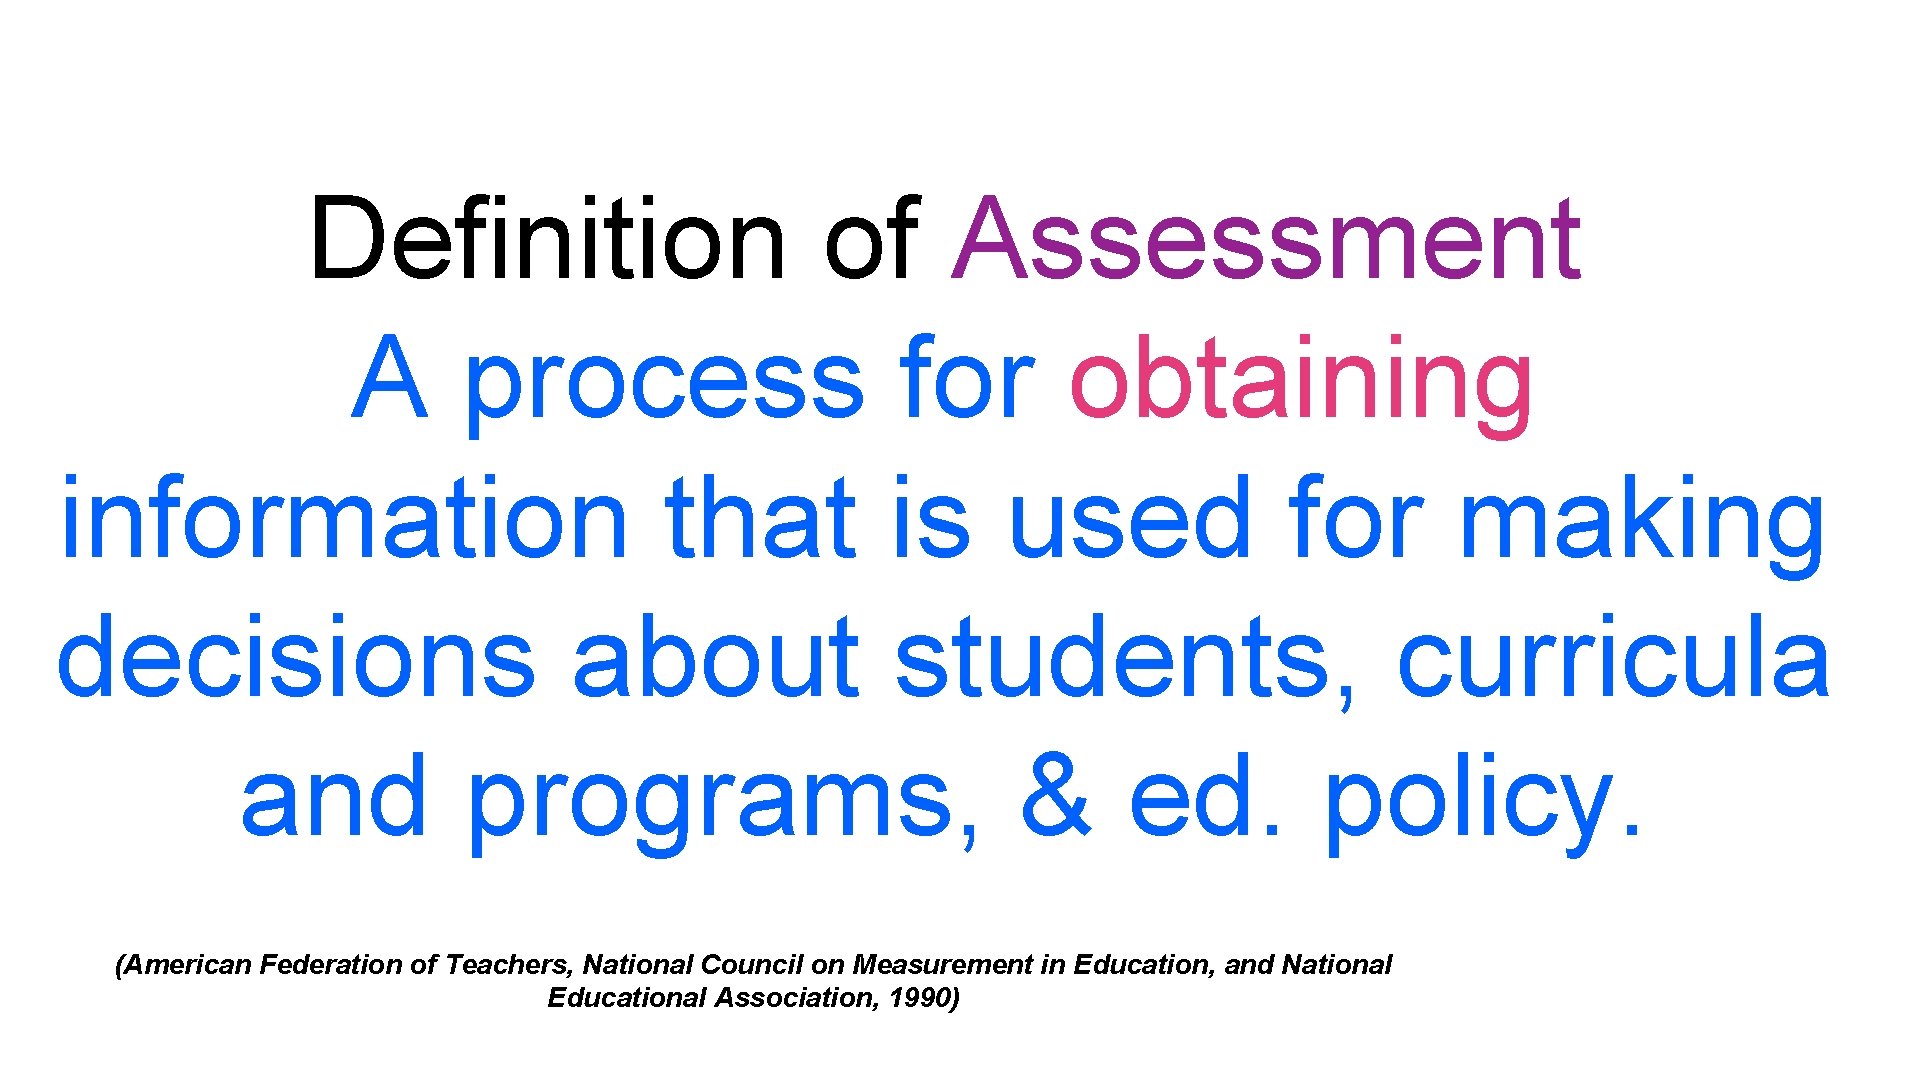 Definition of Assessment A process for obtaining information that is used for making decisions